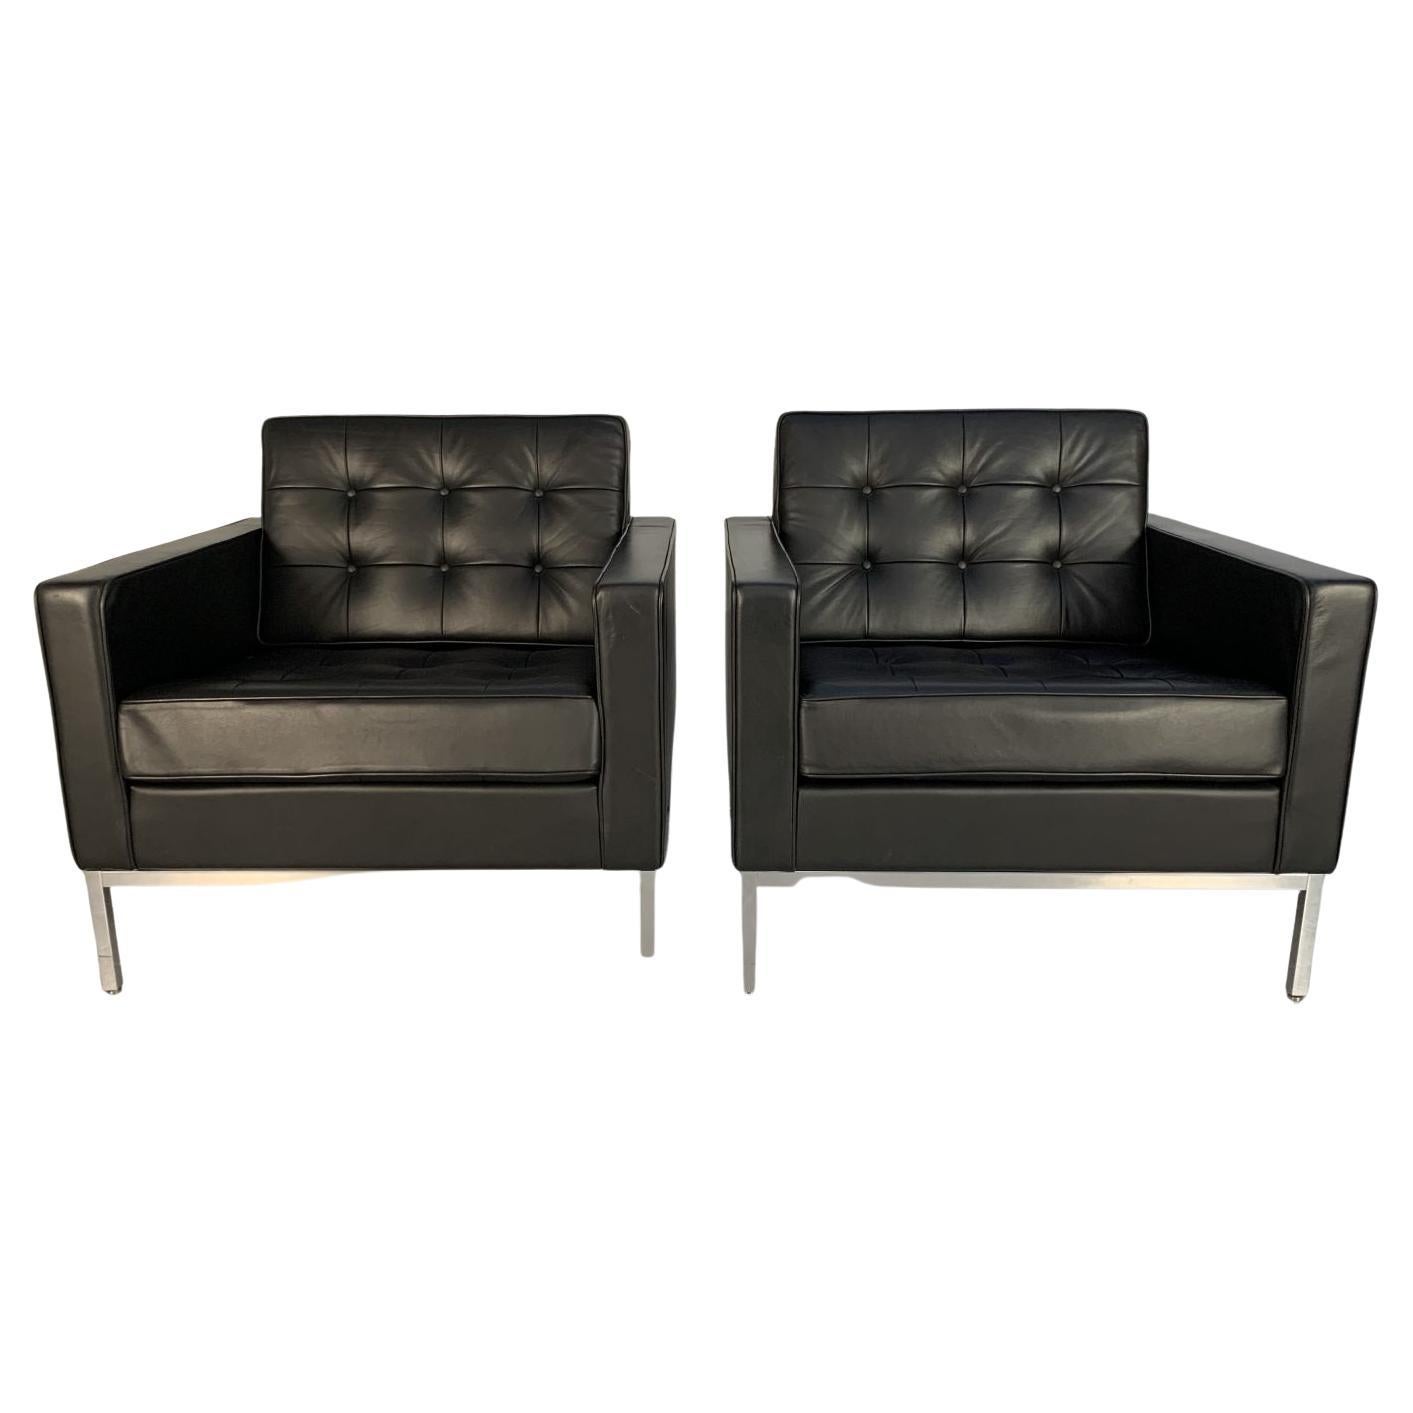 Pair of Knoll Studio “Florence Knoll” Lounge Armchairs In Black “Volo” Leather For Sale